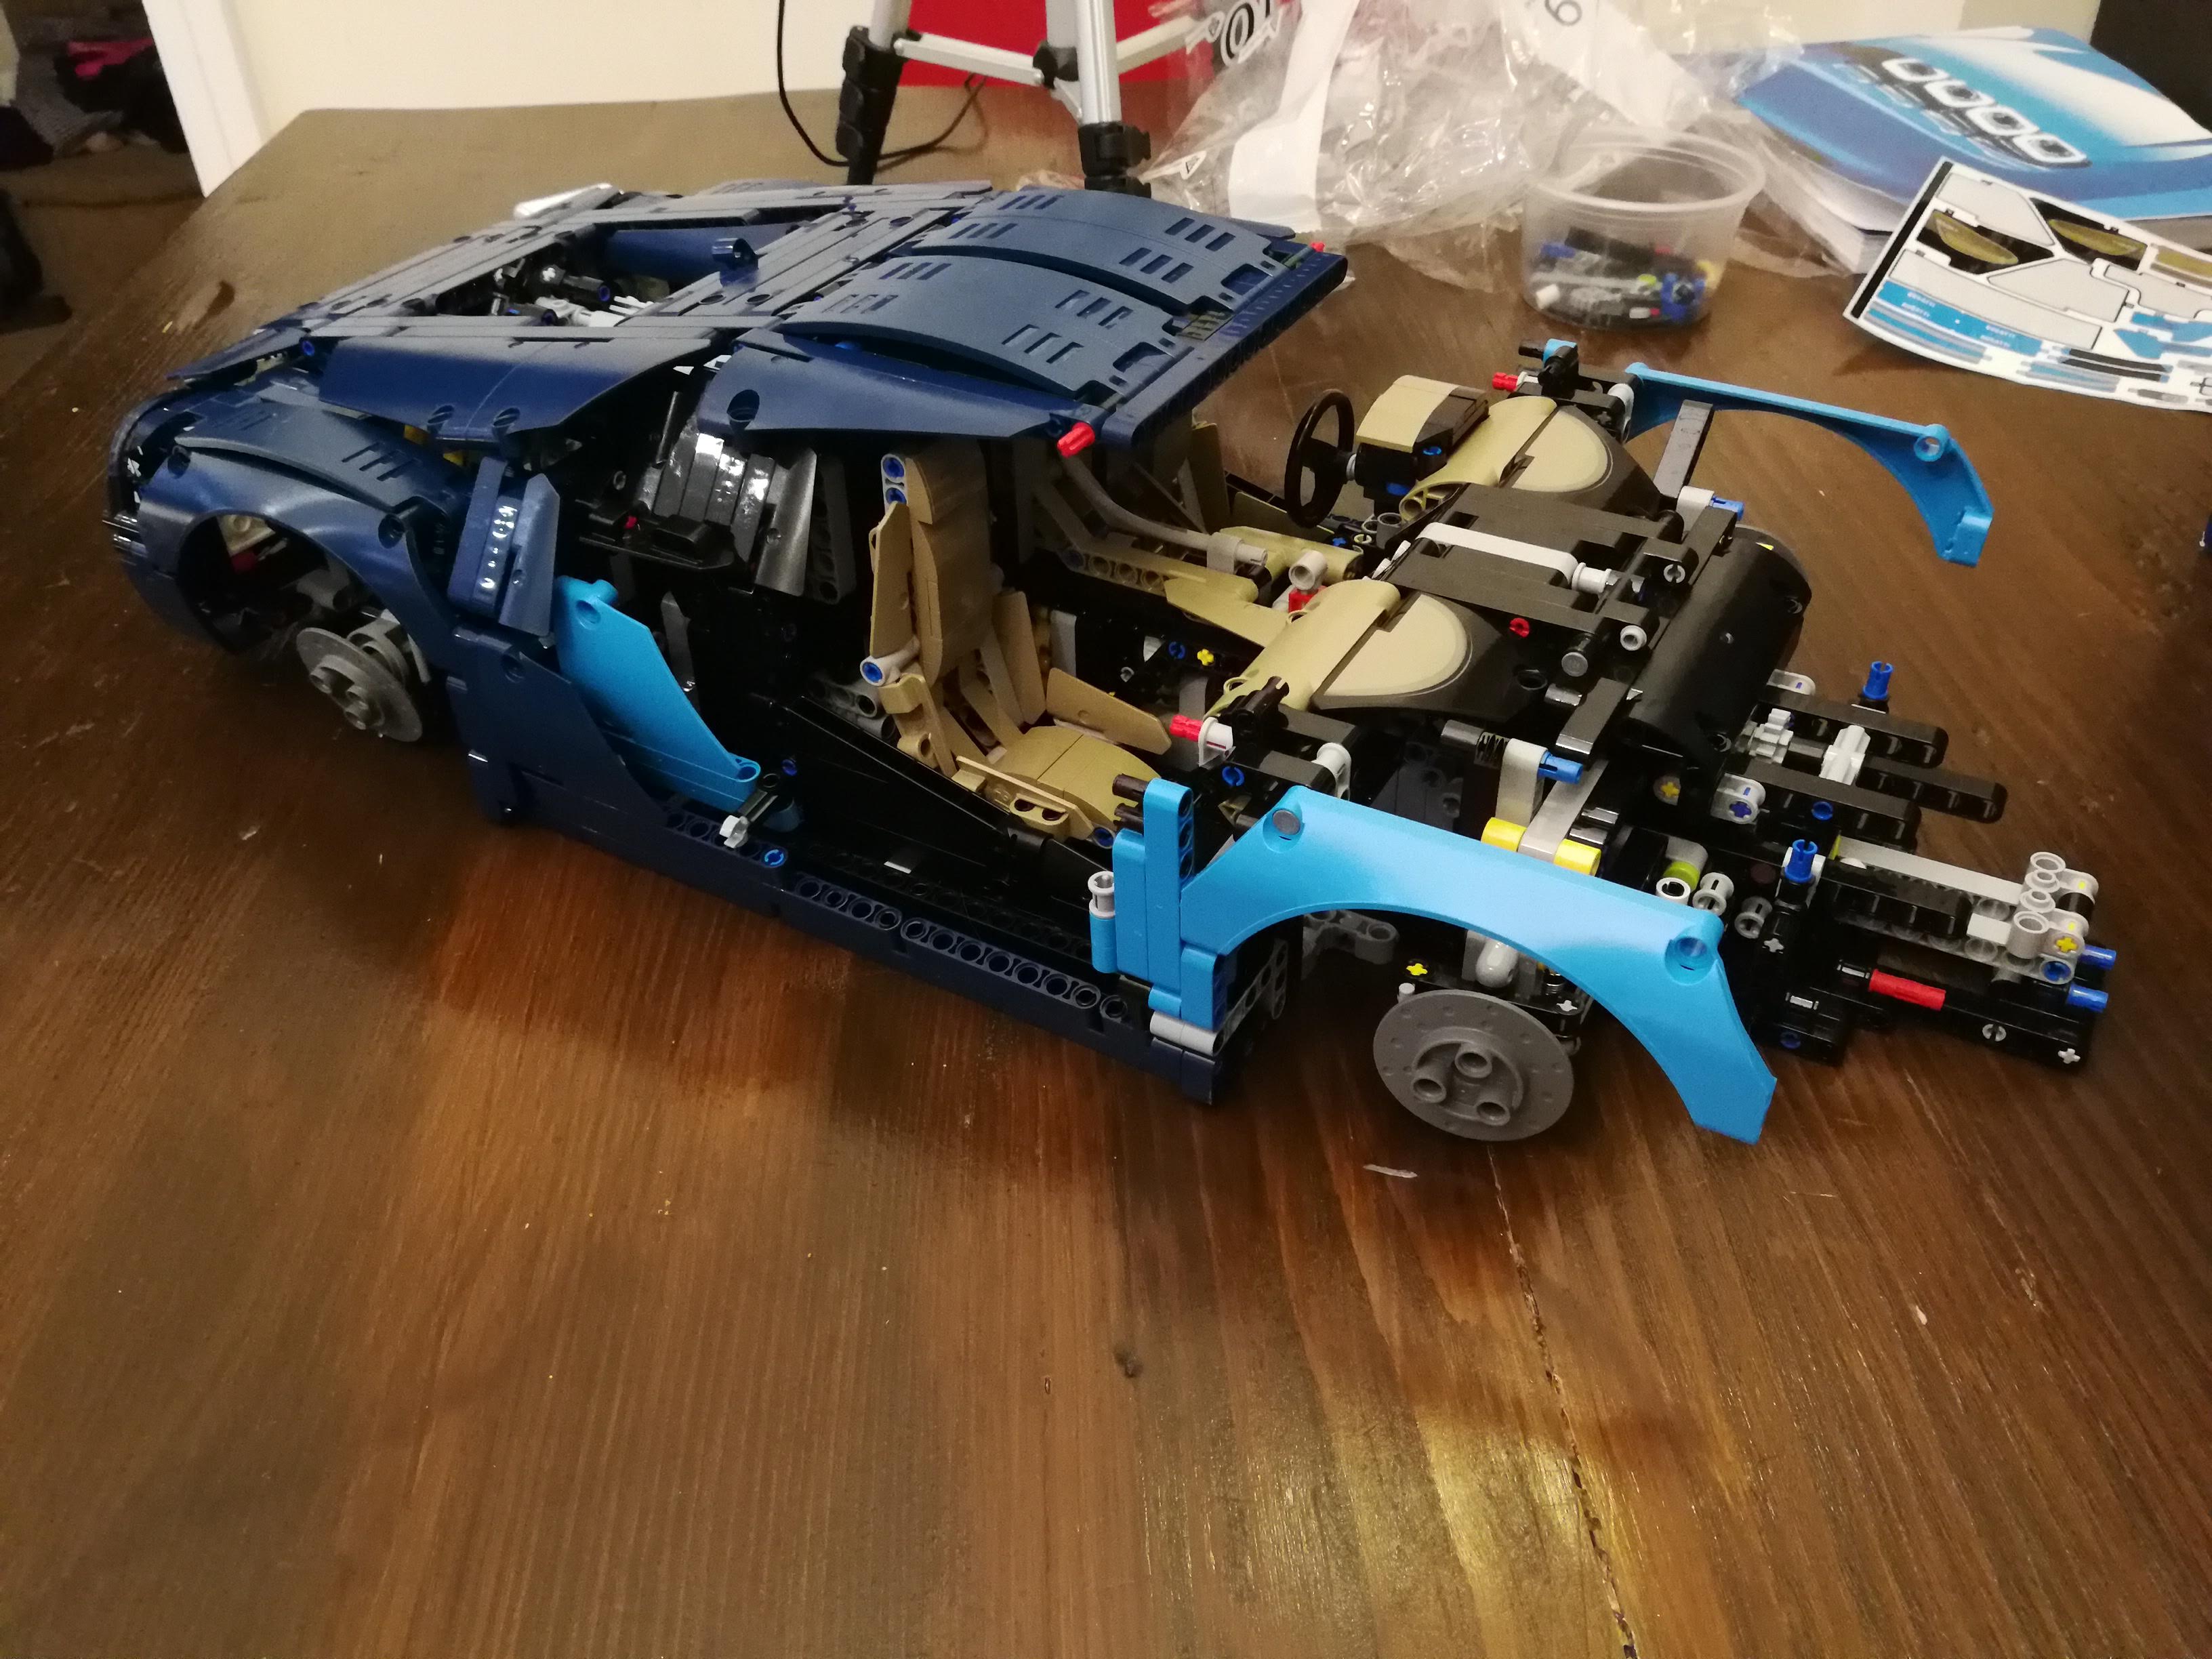 This is what it's like to build the LEGO Technic Bugatti model